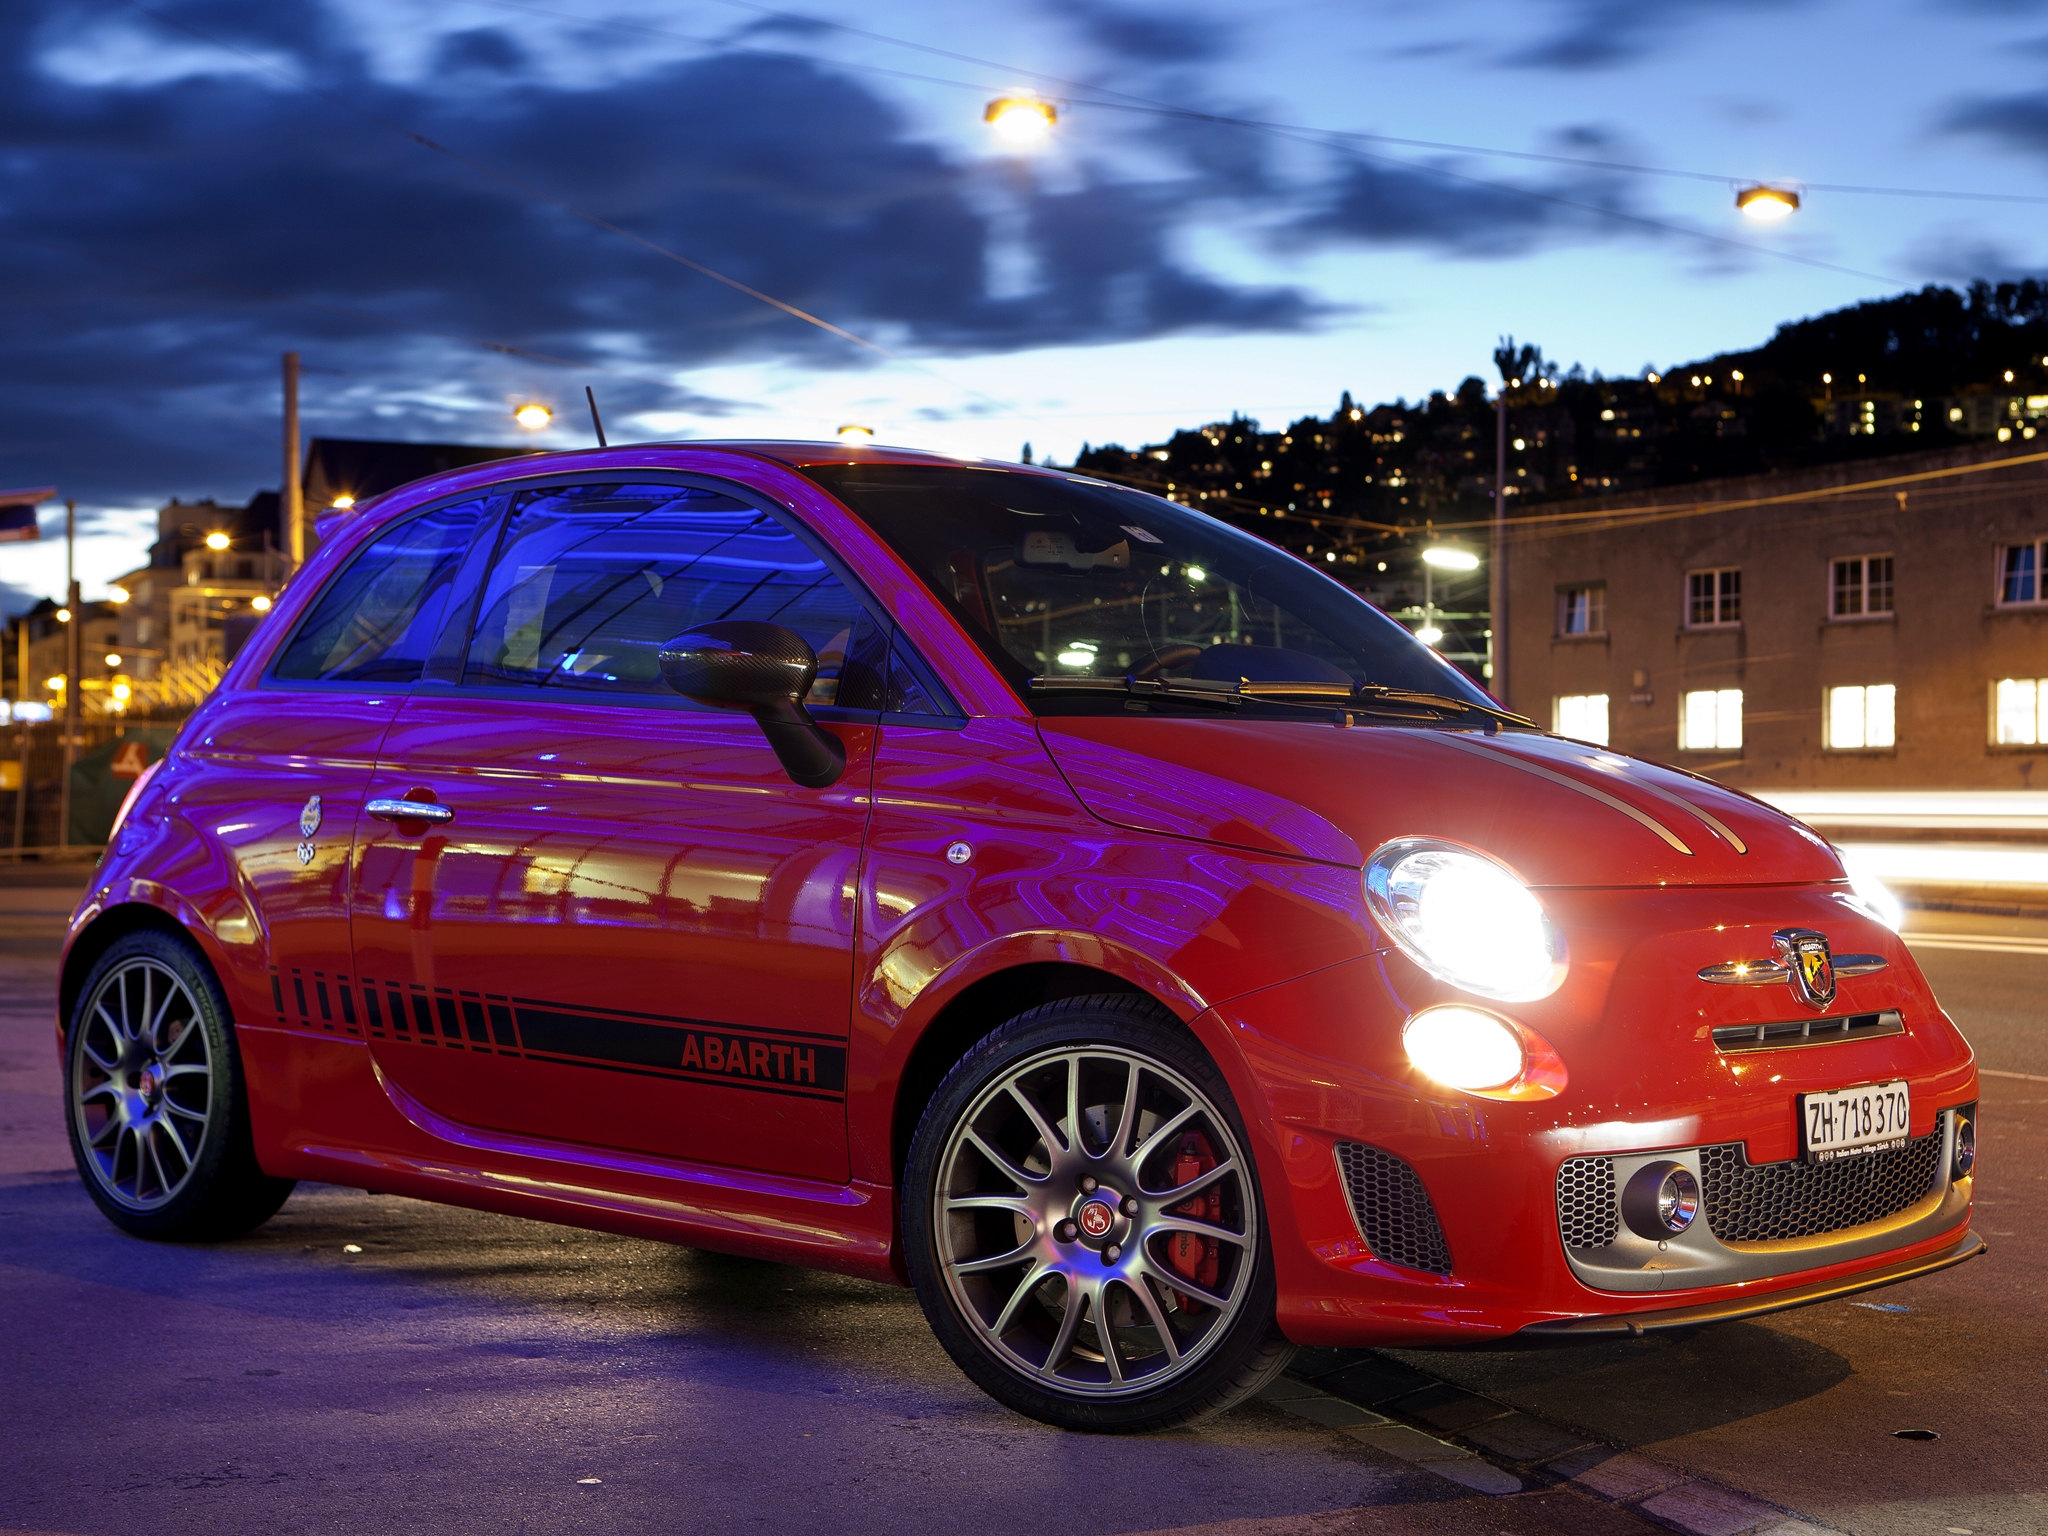 149033 Screensavers and Wallpapers Stylish for phone. Download sports, auto, cars, red, city, lights, side view, stylish, 2011, abarth 695, tributo ferrari pictures for free